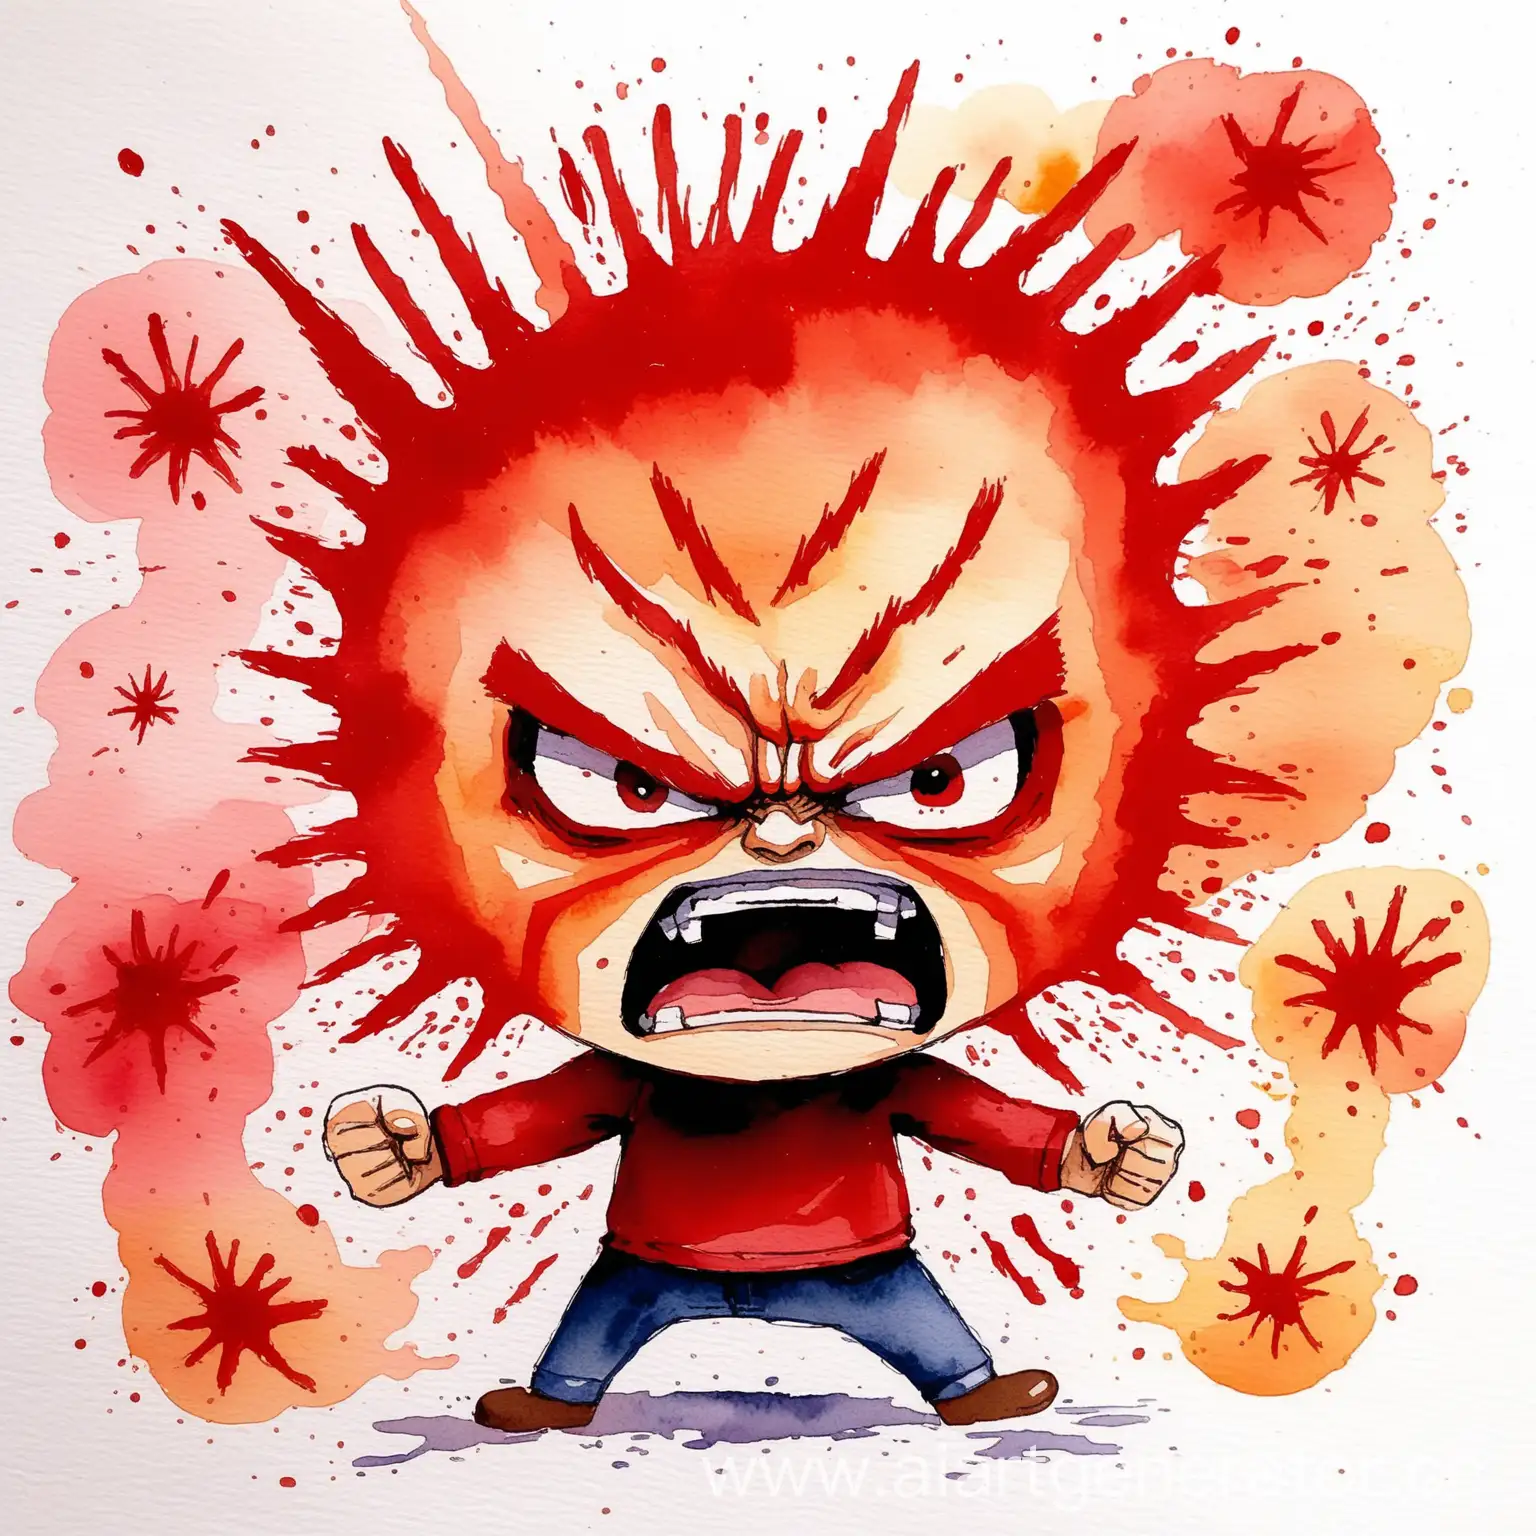 Vibrant-Watercolor-Illustration-of-Intense-Anger